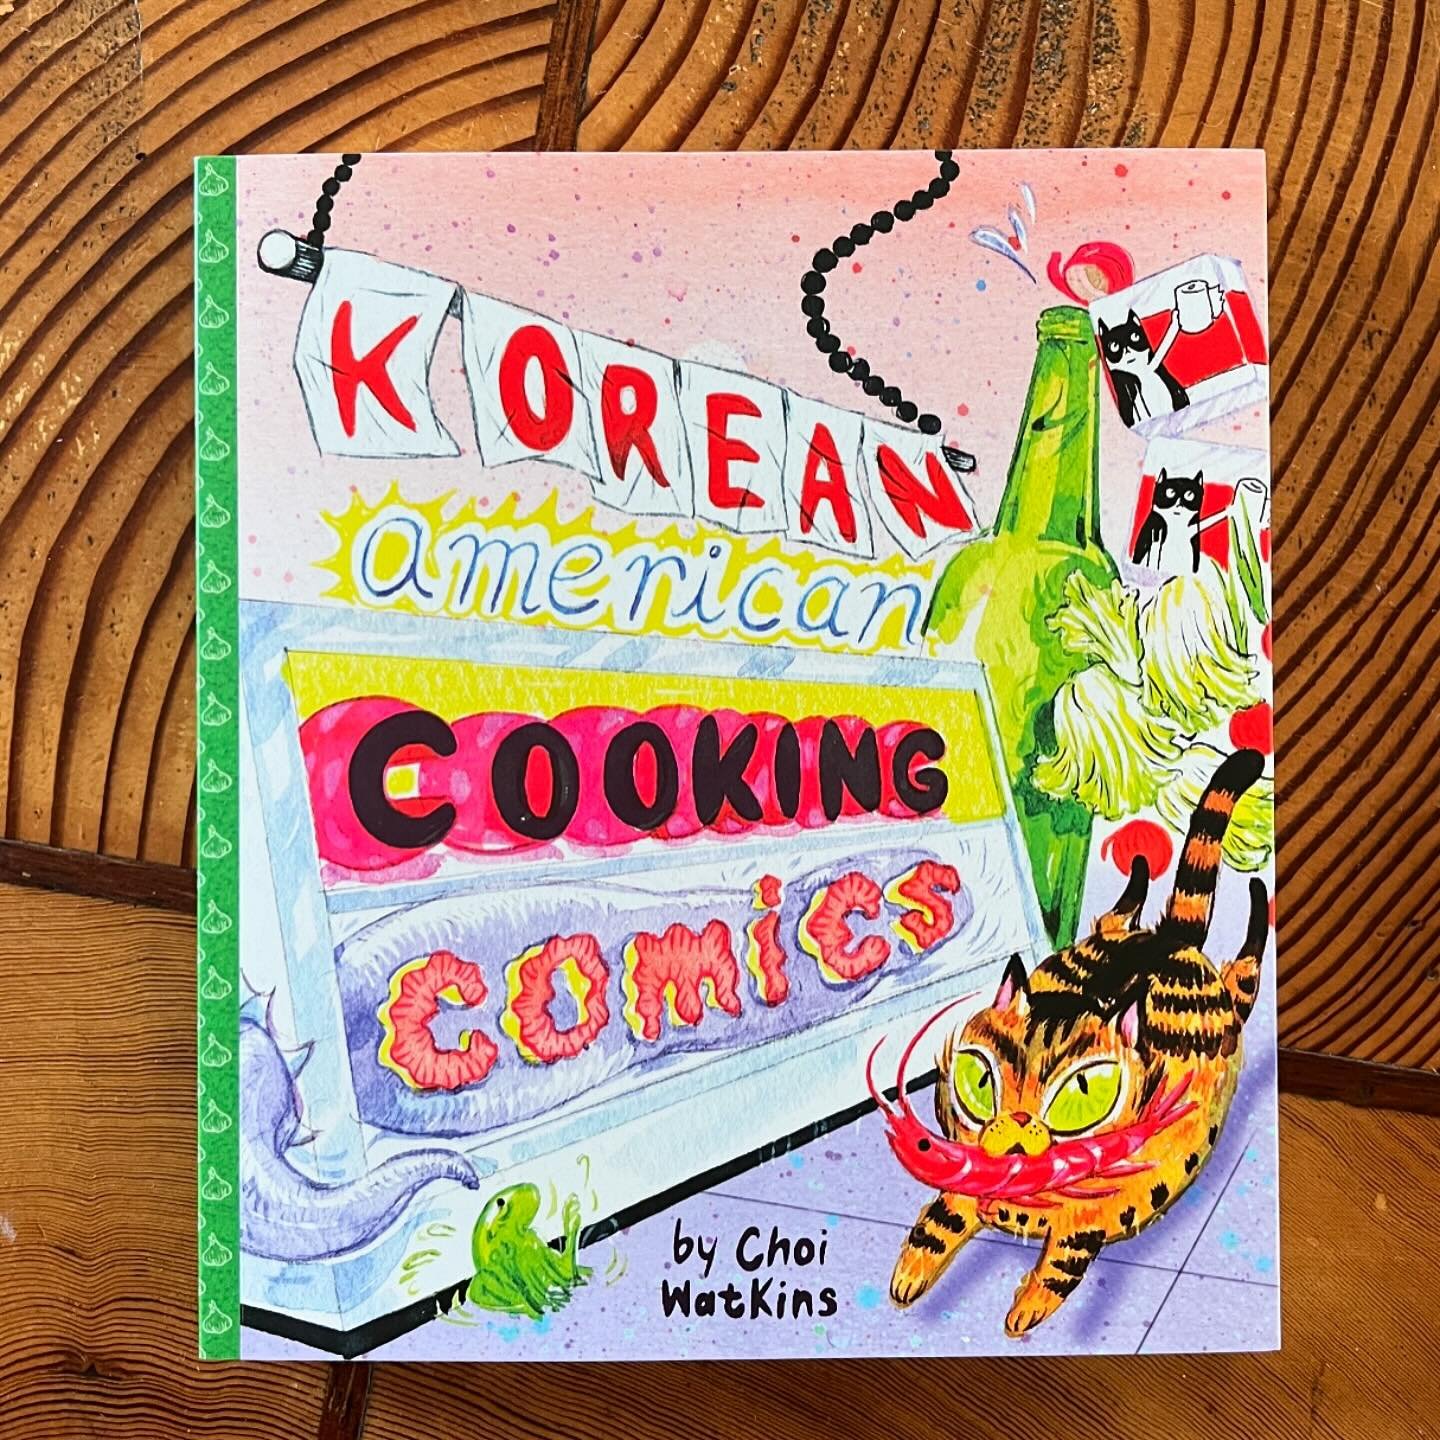 SHQ PUBLISHING IS PROUD TO PRESENT...
&nbsp;
KOREAN AMERICAN COOKING COMICS

2024 SOFTCOVER EDITION
&nbsp;
After a sold out hardcover edition and thousands of zines sold, we are over the moon to bring you the new, softcover edition of Korean American